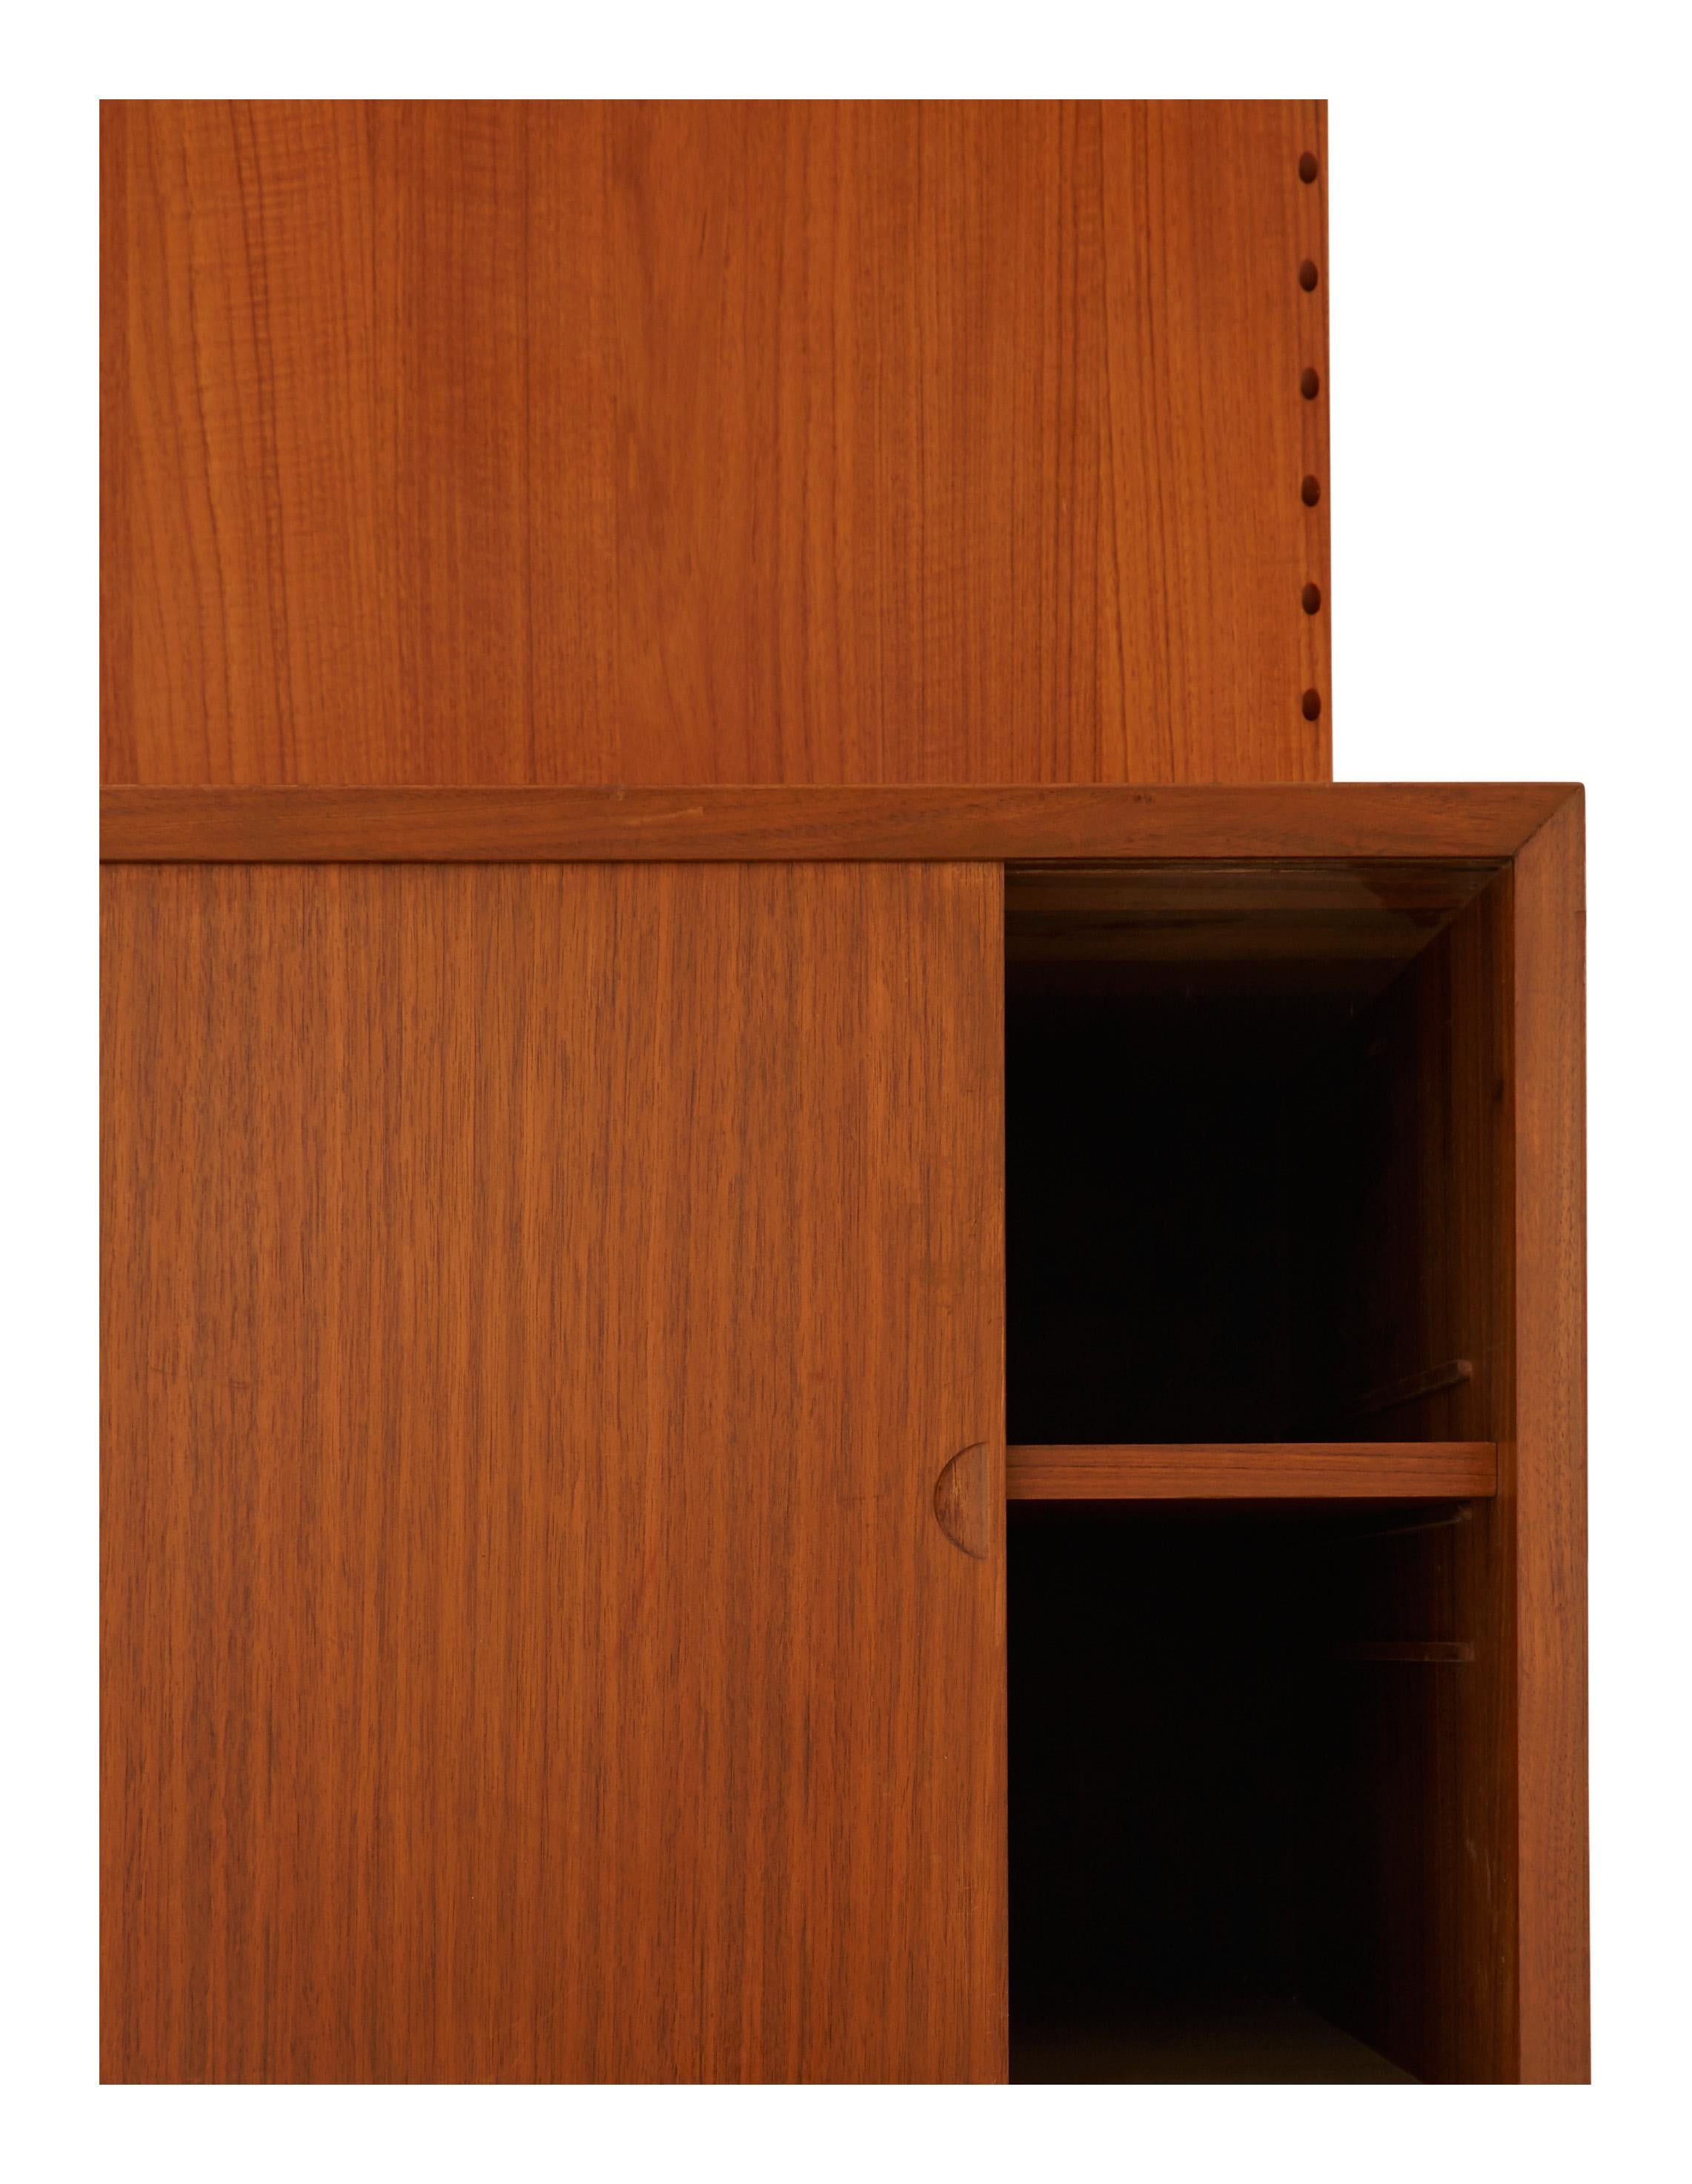 Midcentury Teak Wall Shelving Unit In Good Condition For Sale In Chicago, IL